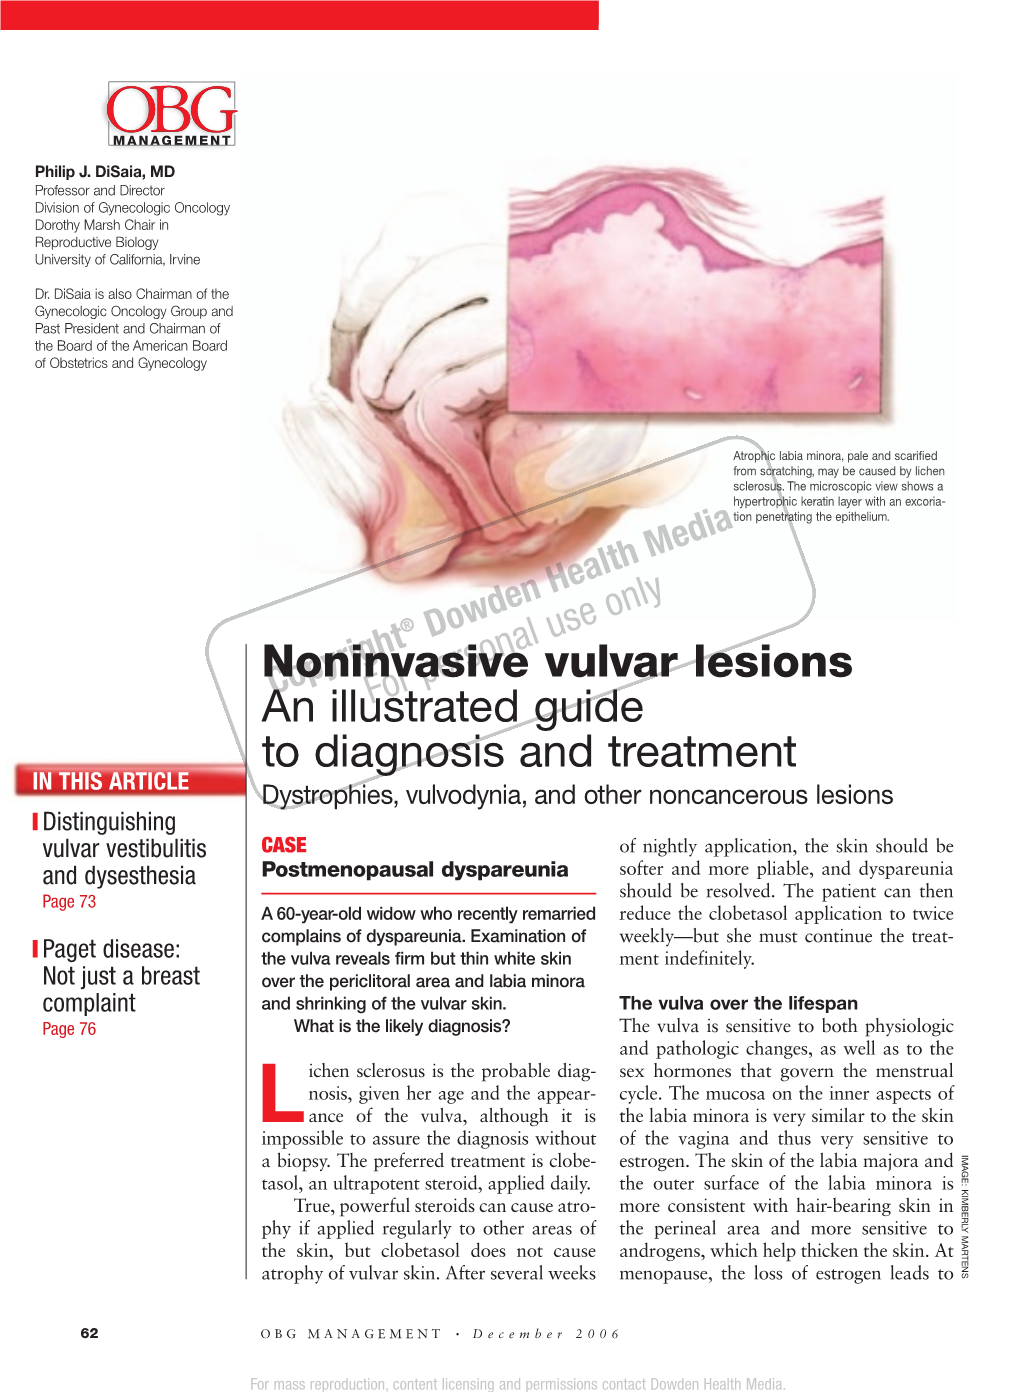 Noninvasive Vulvar Lesions an Illustrated Guide to Diagnosis and Treatment